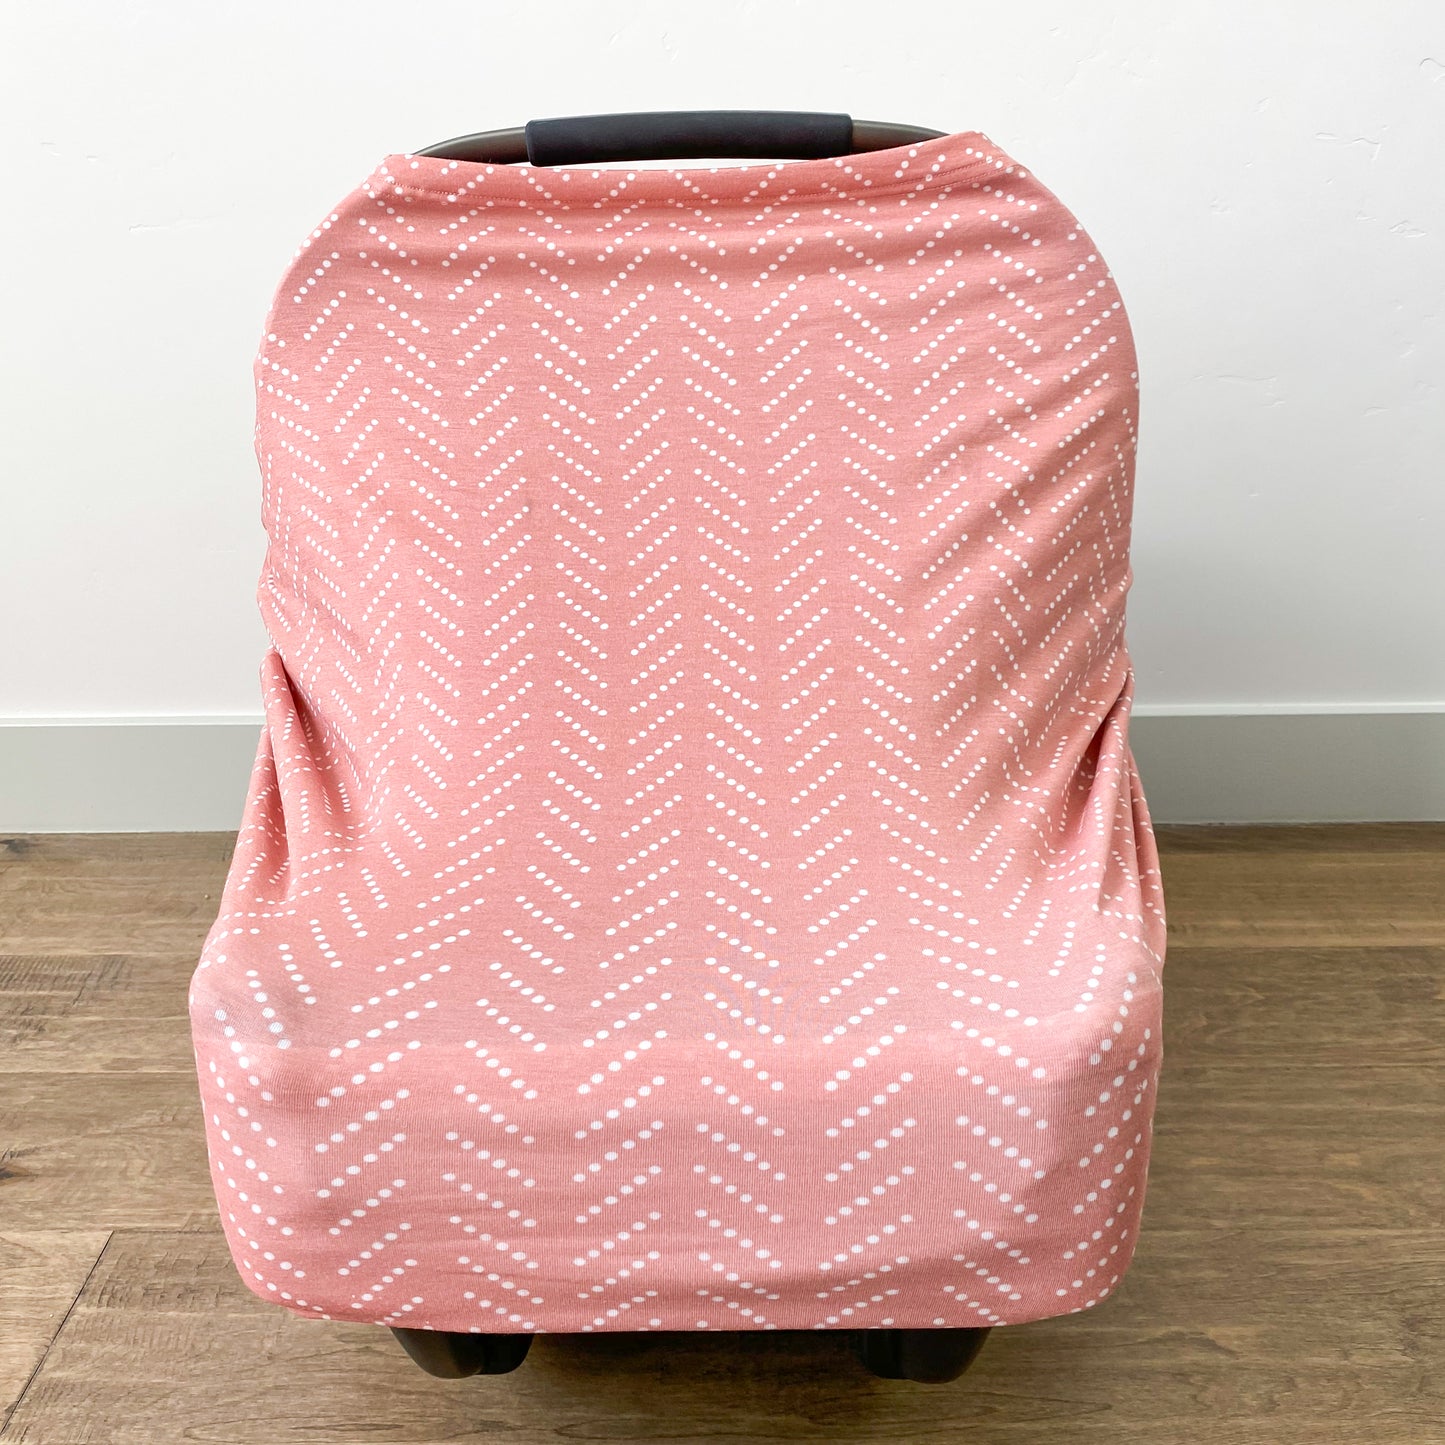 Extra Soft and Stretchy Nursing and Carseat Cover: Desert Dots